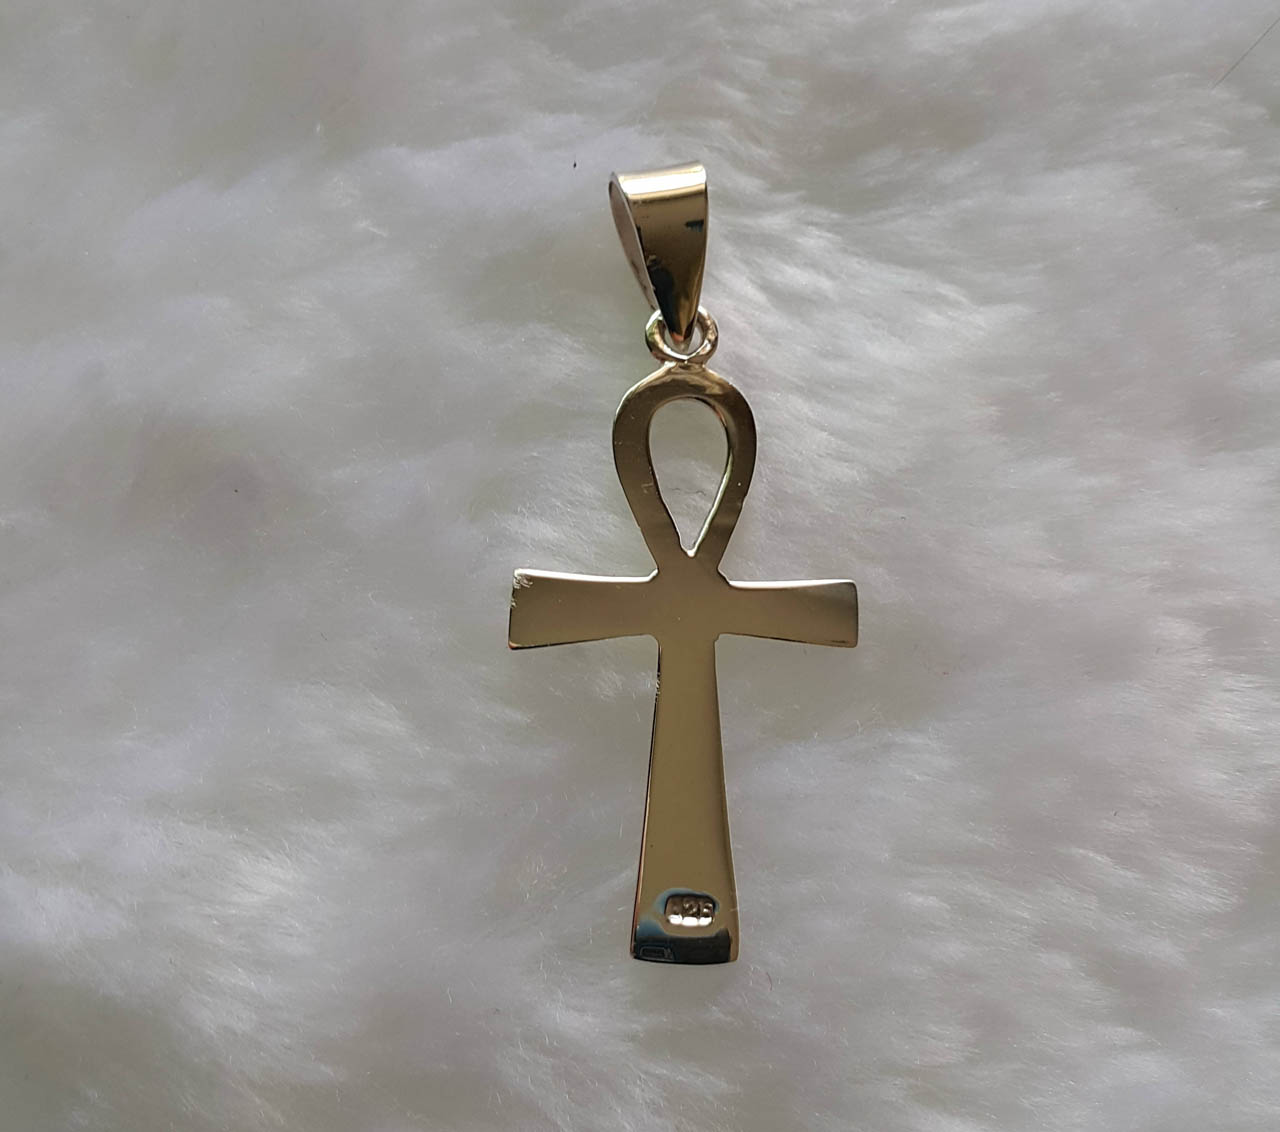 STERLING SILVER CHARM Egyptian Cross Key of Life ANKH 